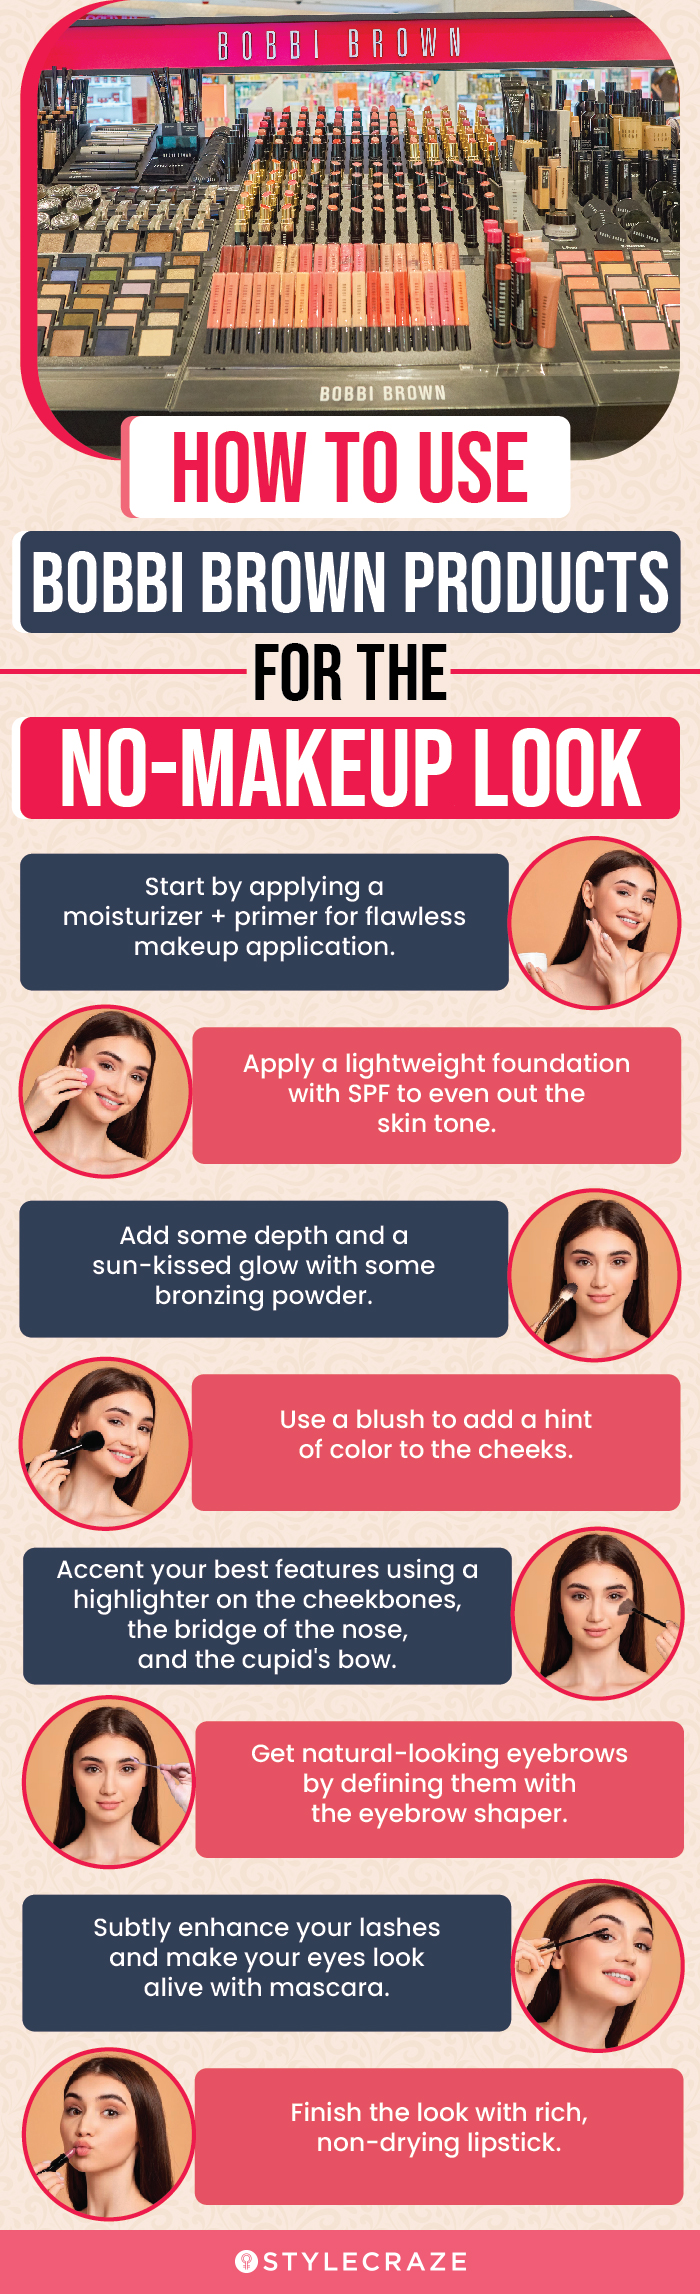 How To Use Bobbi Brown Products (infographic)